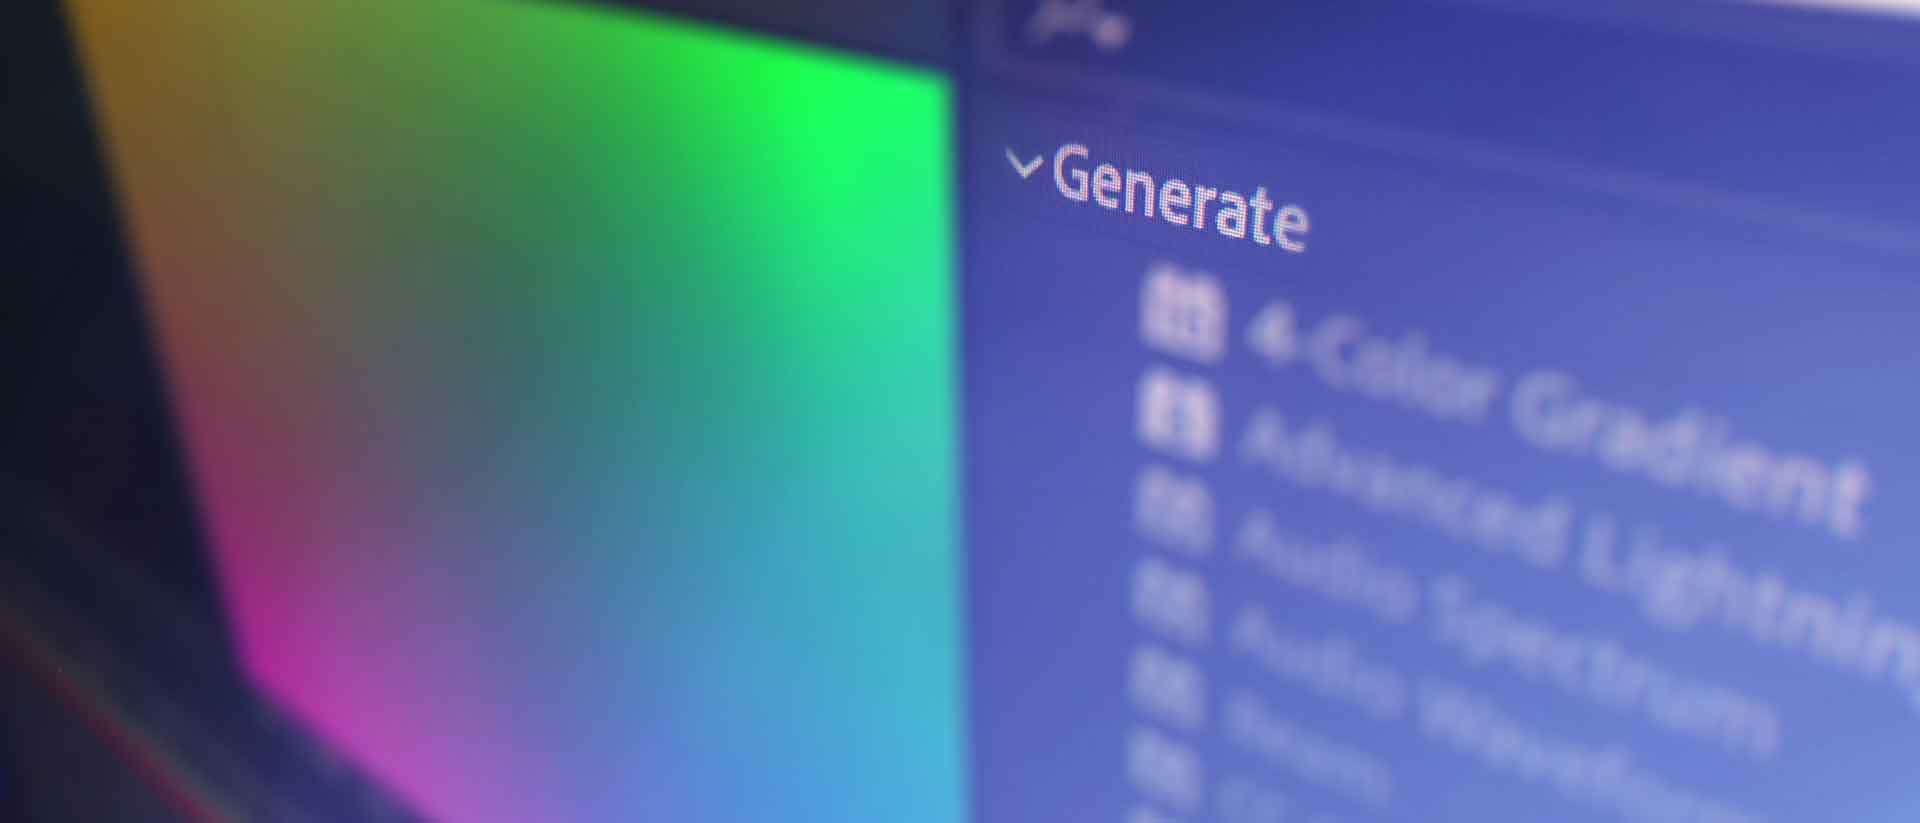 A Quick Guide to After Effects' 26 'Generate' Effects